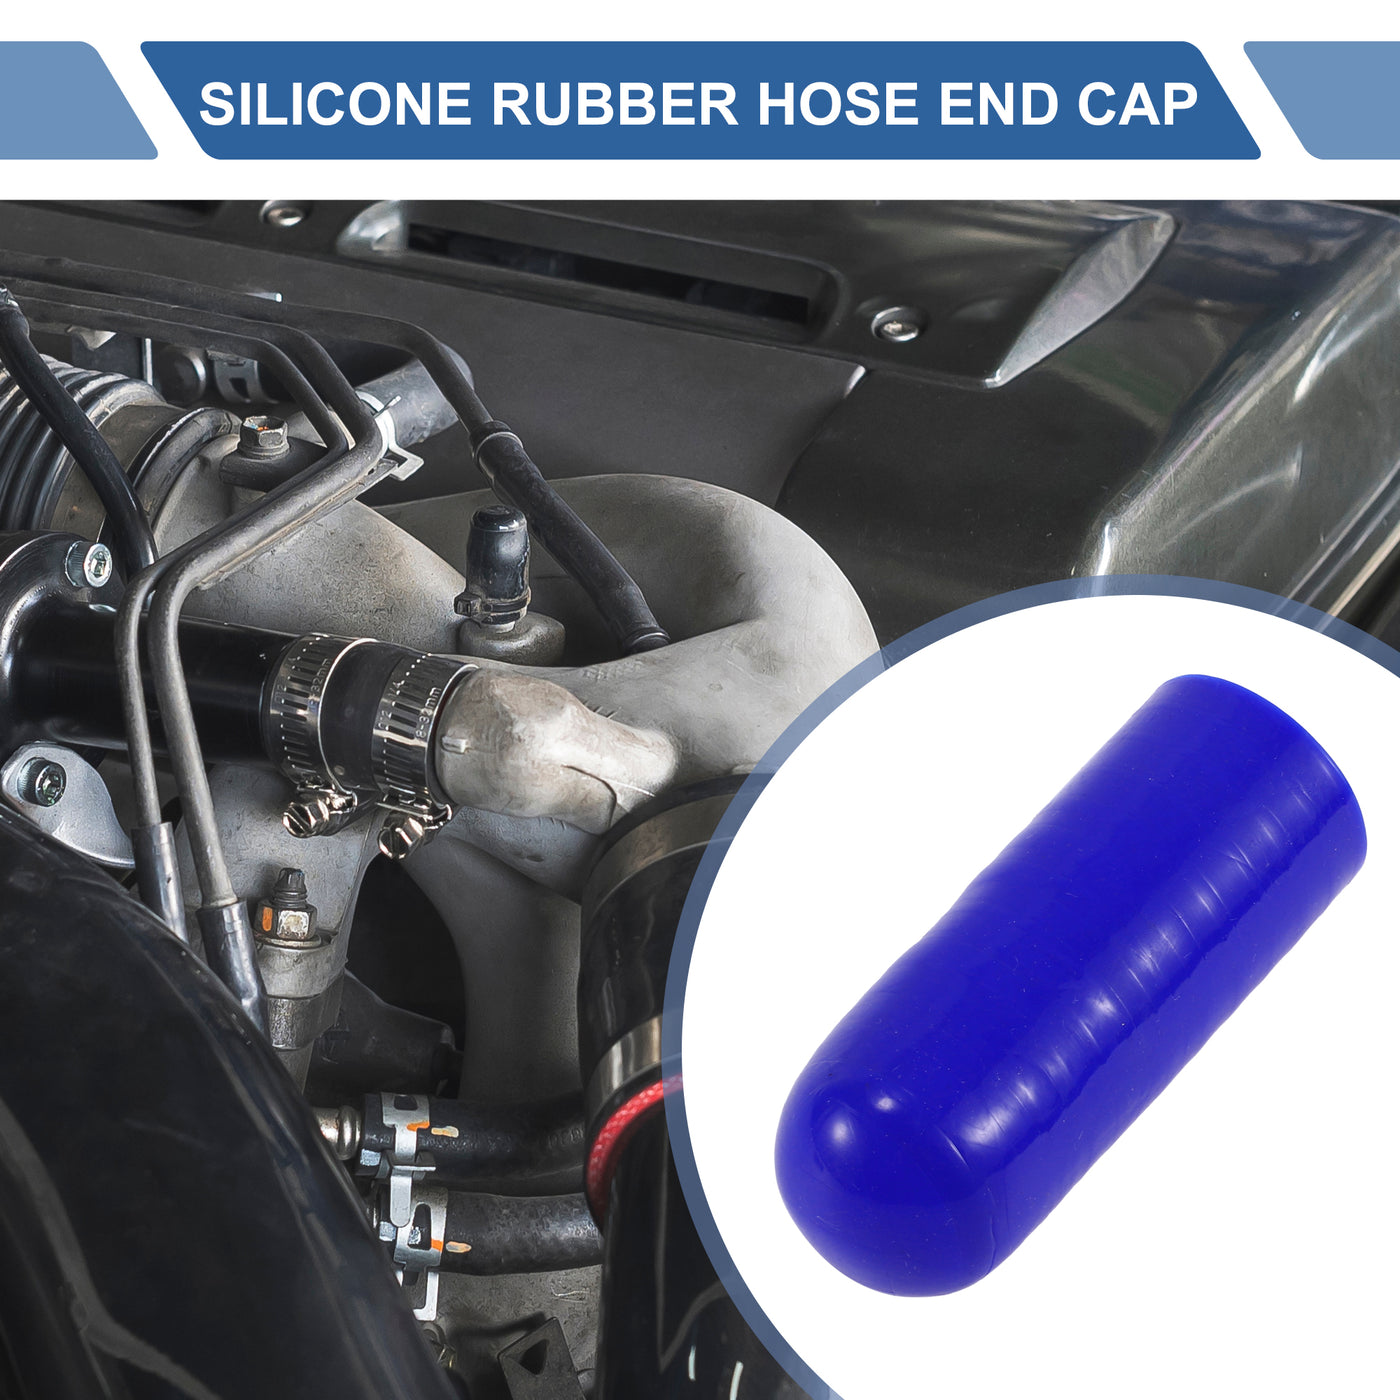 X AUTOHAUX 1 Pcs 60mm Length 22mm/0.87" ID Blue Car Silicone Rubber Hose End Cap with Clamp Silicone Reinforced Blanking Cap for Bypass Tube Universal